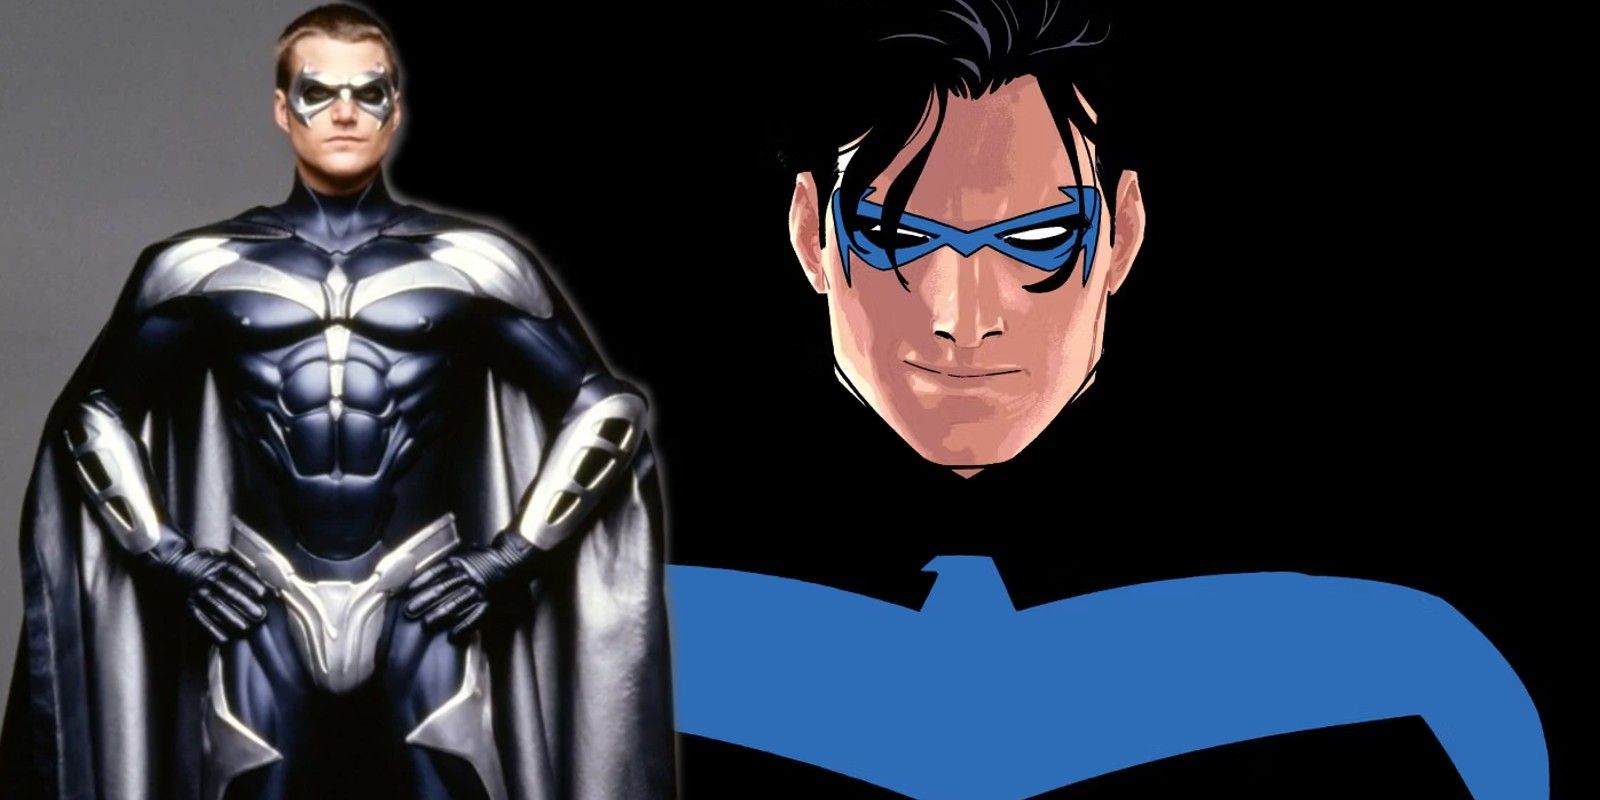 Schumacher Batman and Robin Nightwing Costume Over Comic Book Nightwing Cover